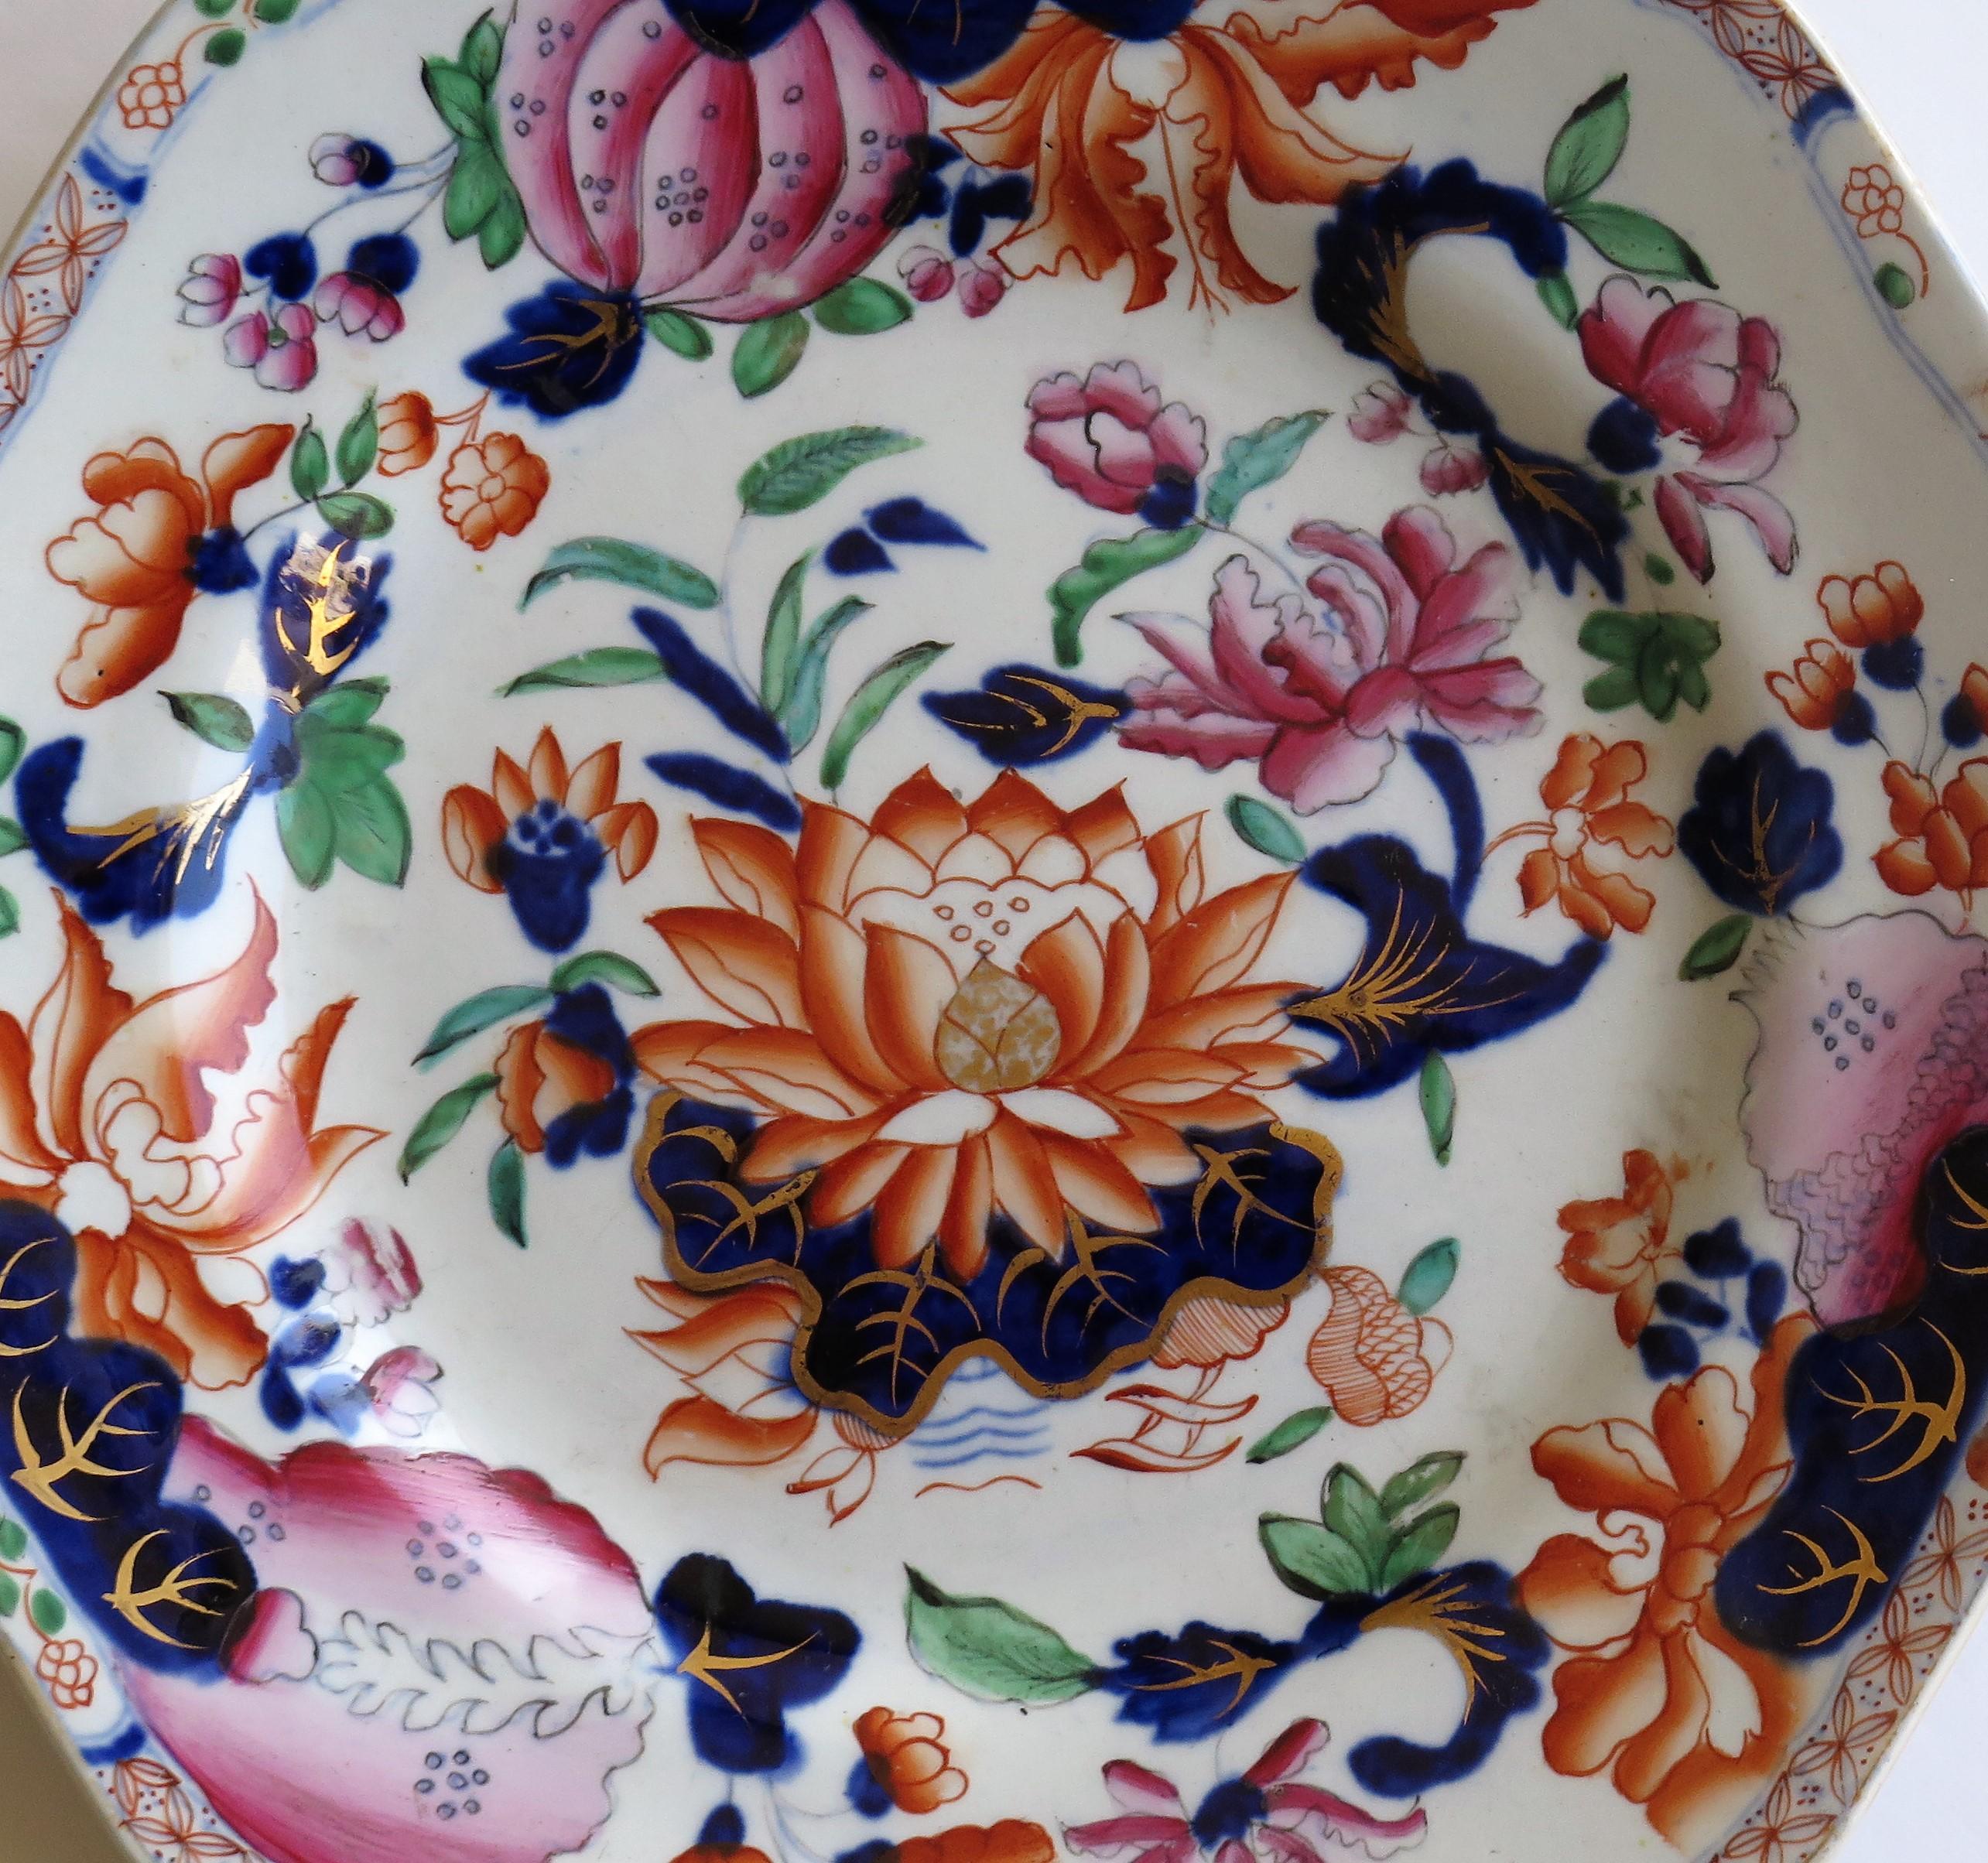 This is a very good hexagonal plate or dish in the Water Lily pattern, made by Hicks and Meigh of Shelton, Staffordshire, England between 1812 and 1822, probably circa 1815.

This is a beautiful plate or dish of a shaped hexagonal form on a raised